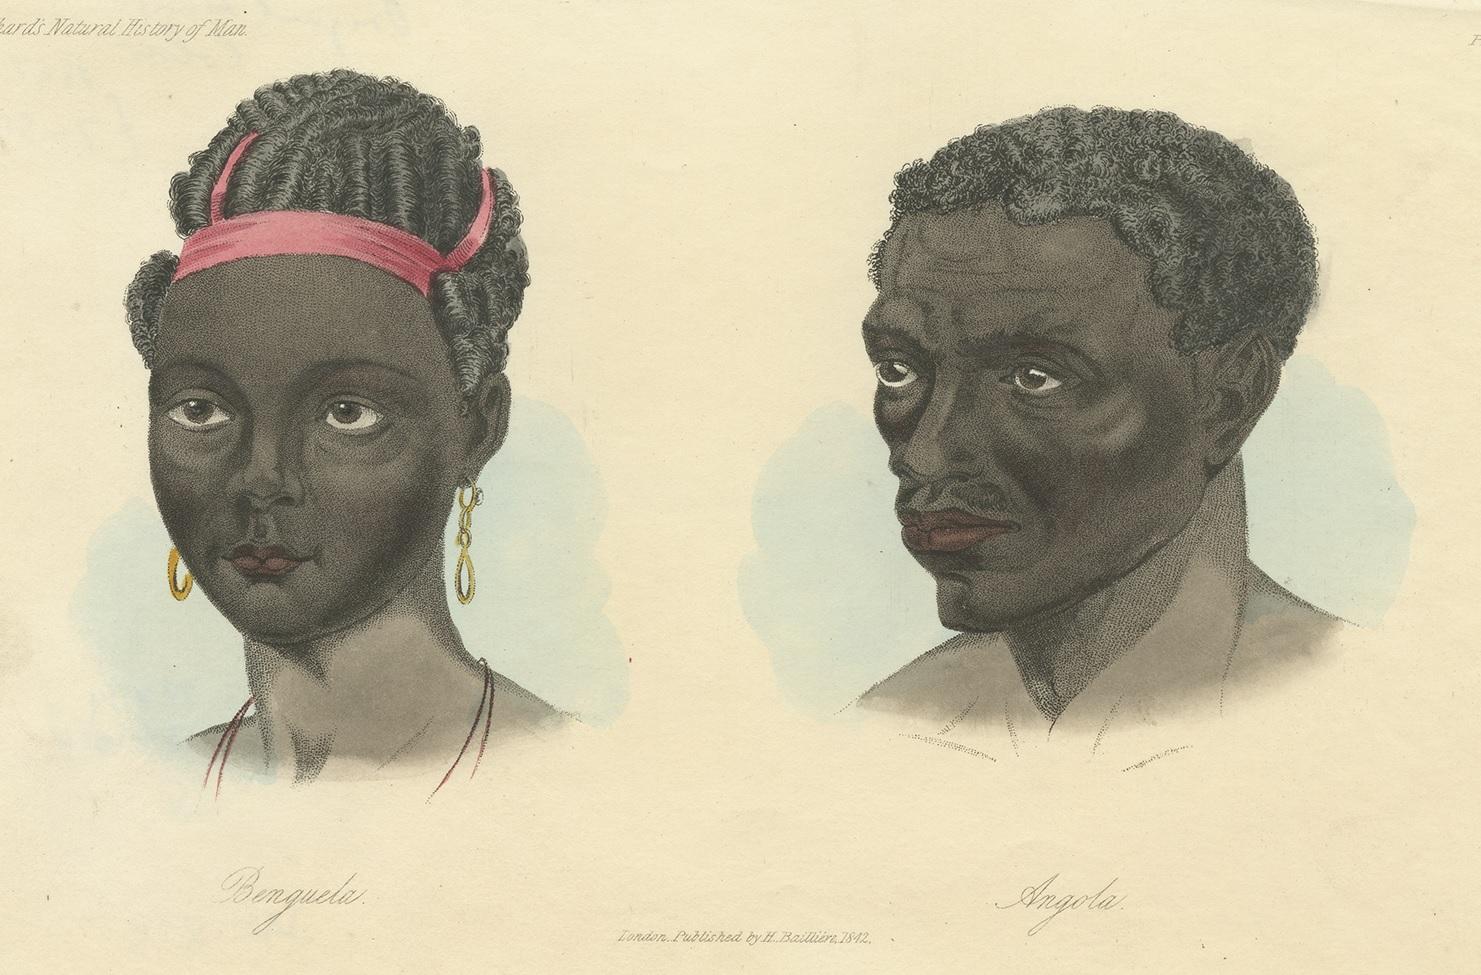 Antique print titled 'Benguela - Angola'. Antique print of a native of Benguela city in headdress and earrings, and a native of Angola. This print originates from 'Natural History of Man' by J.C. Prichard. A wonderful series of portraits of natives